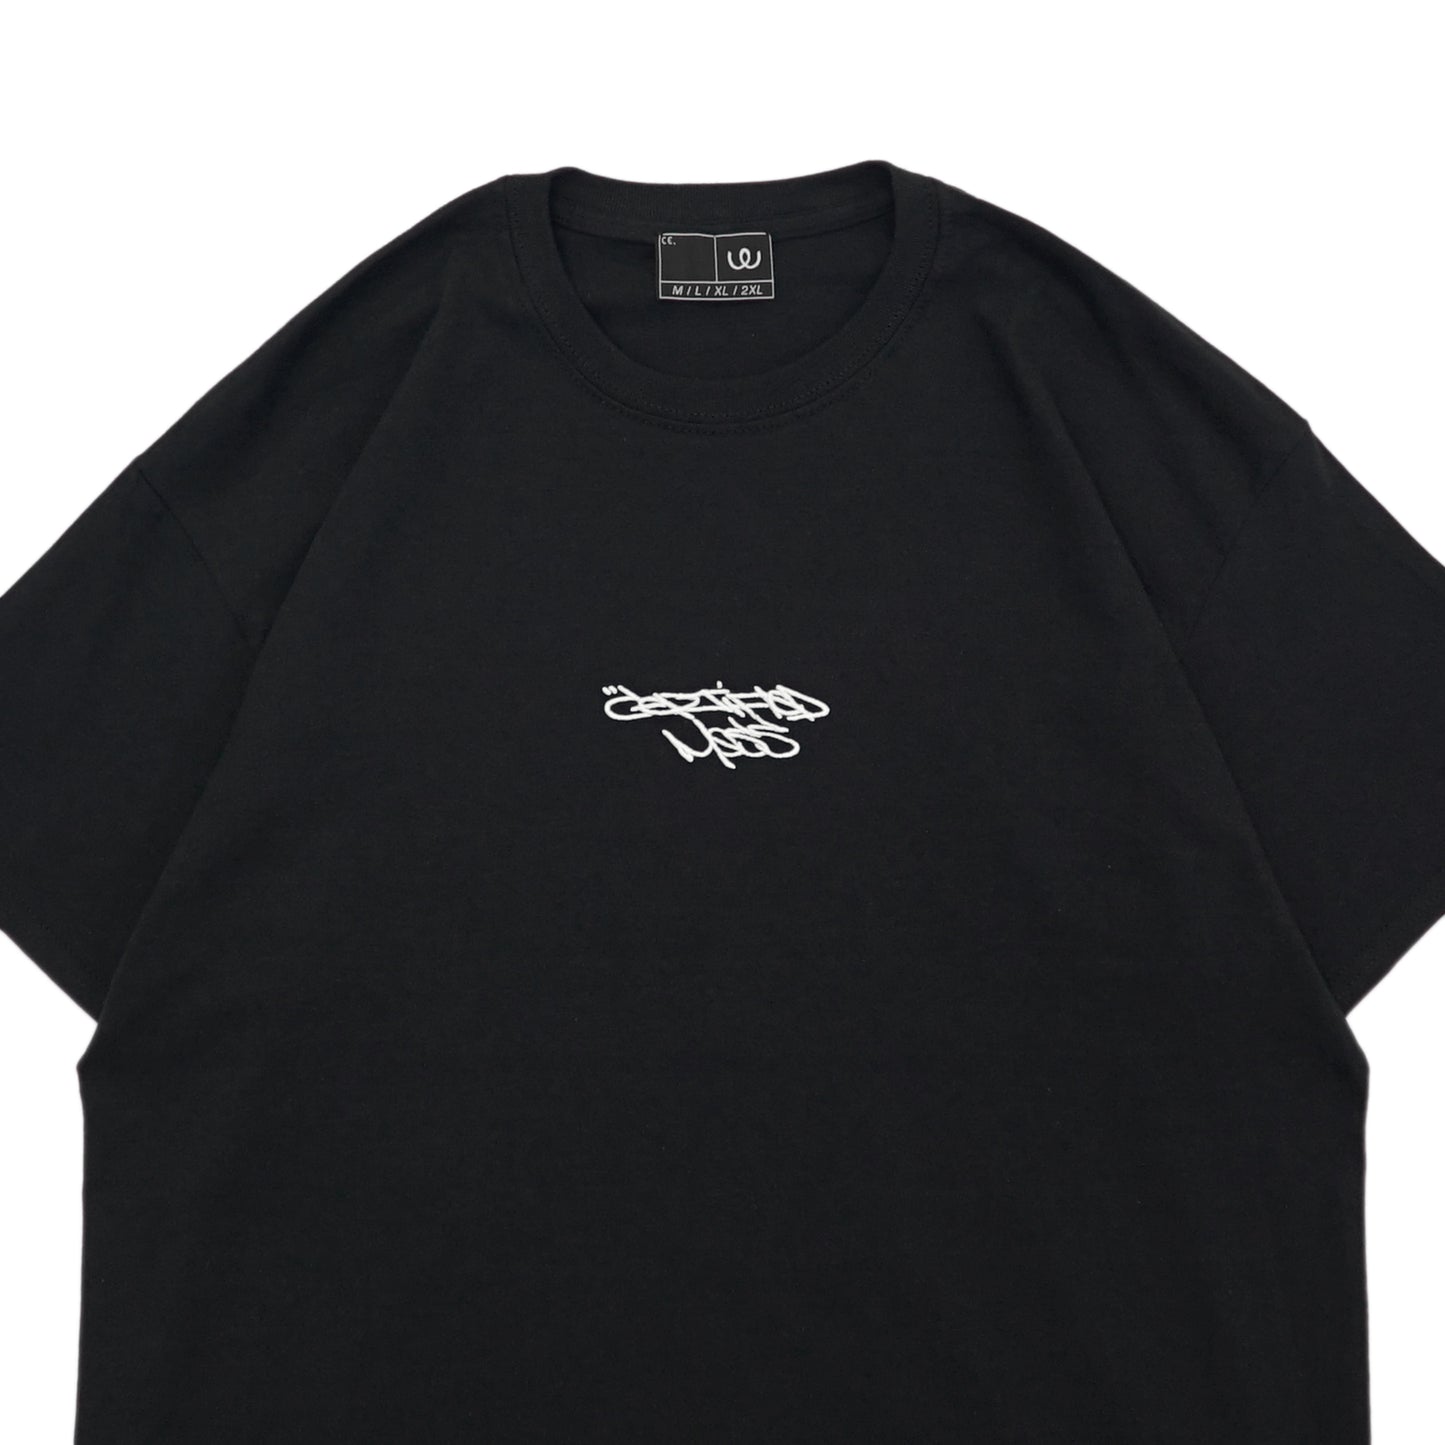 CE - Certified Mess Embroidered T-Shirt/Black